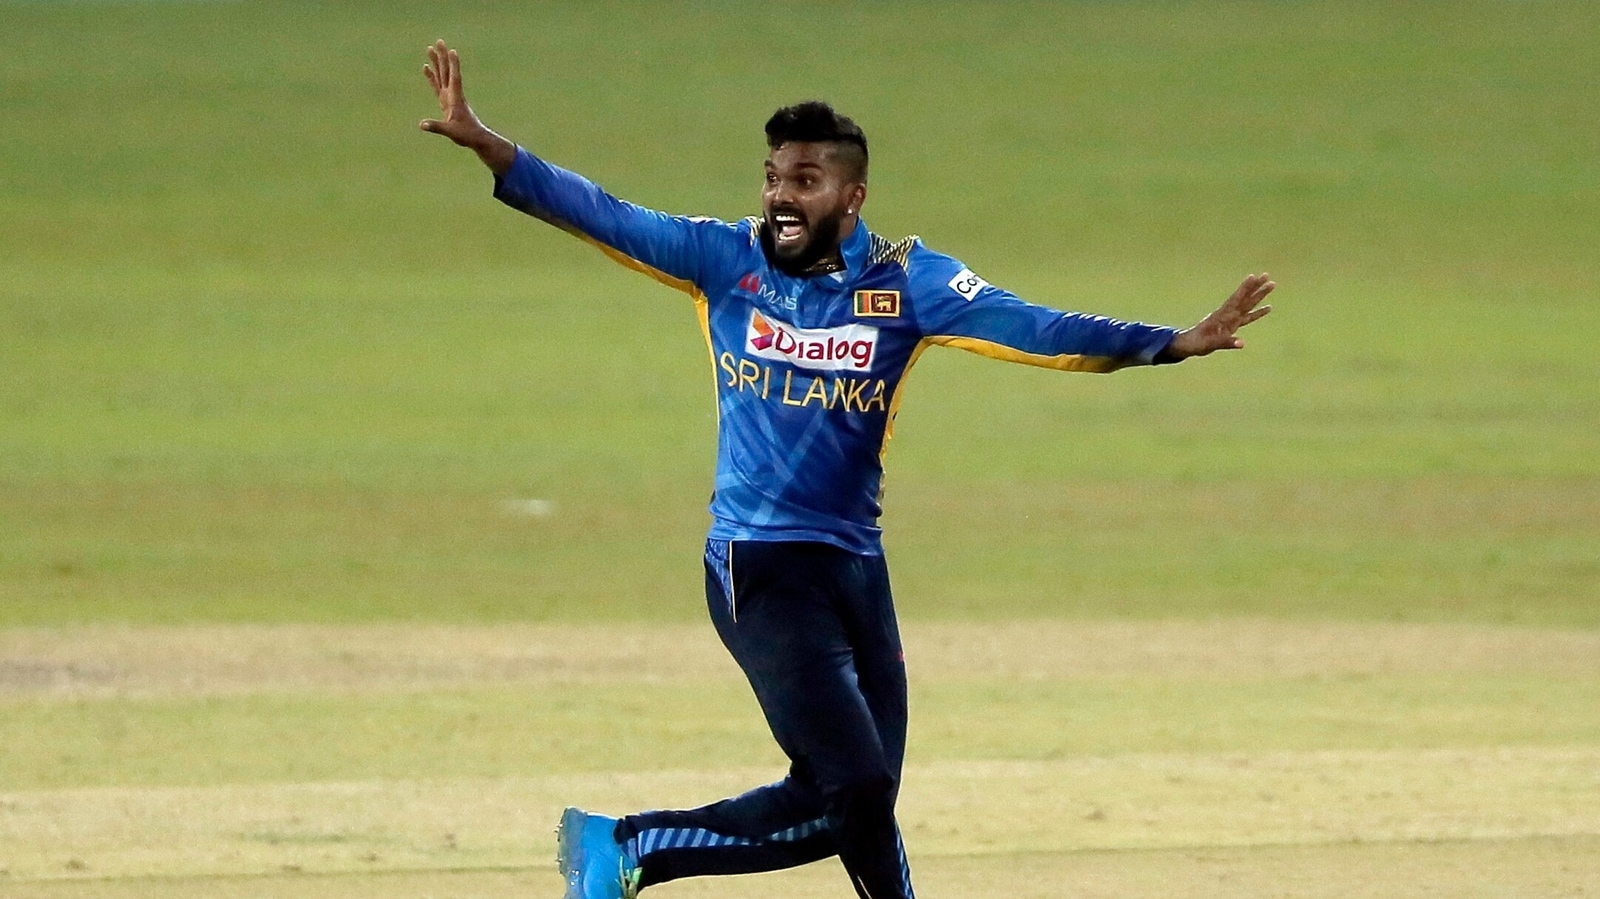 Excited and honoured&#39;: Wanindu Hasaranga on being part of RCB squad for IPL  2021 | Cricket - Hindustan Times